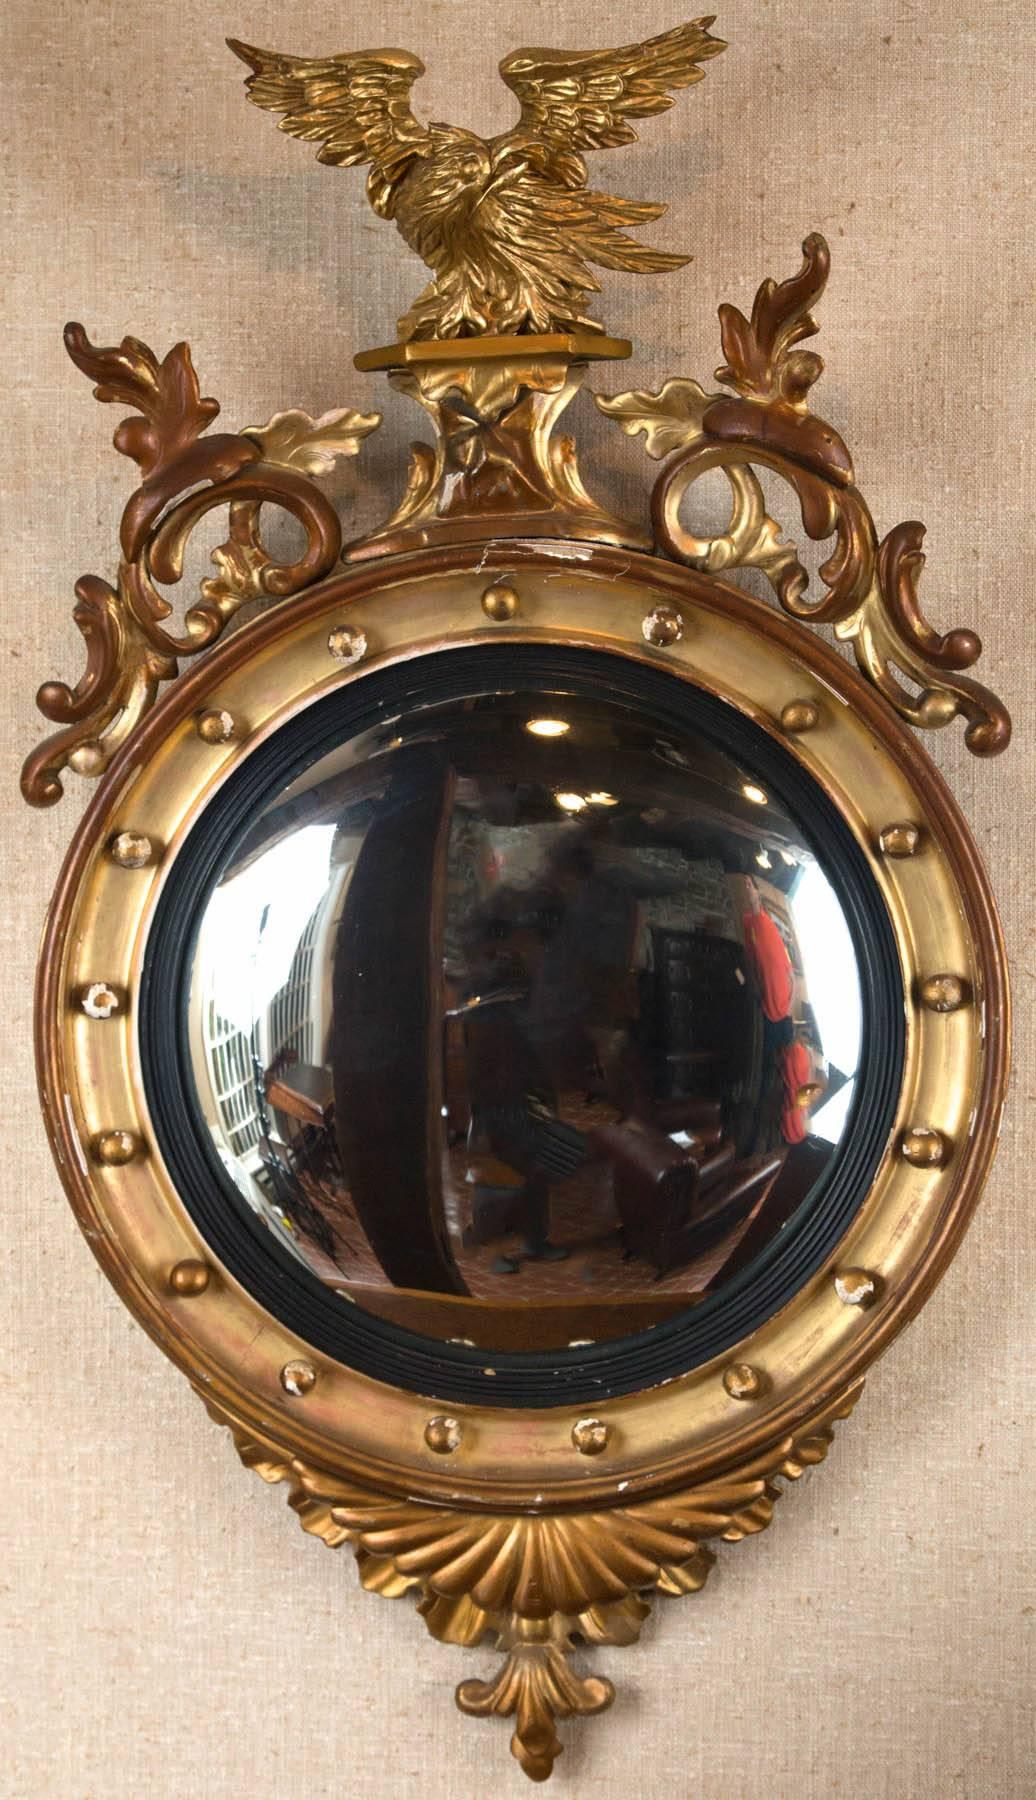 English giltwood convex mirror with reeded ebonized slip and surmounted with well carved eagle with scroll supports. Original glass and gilt.